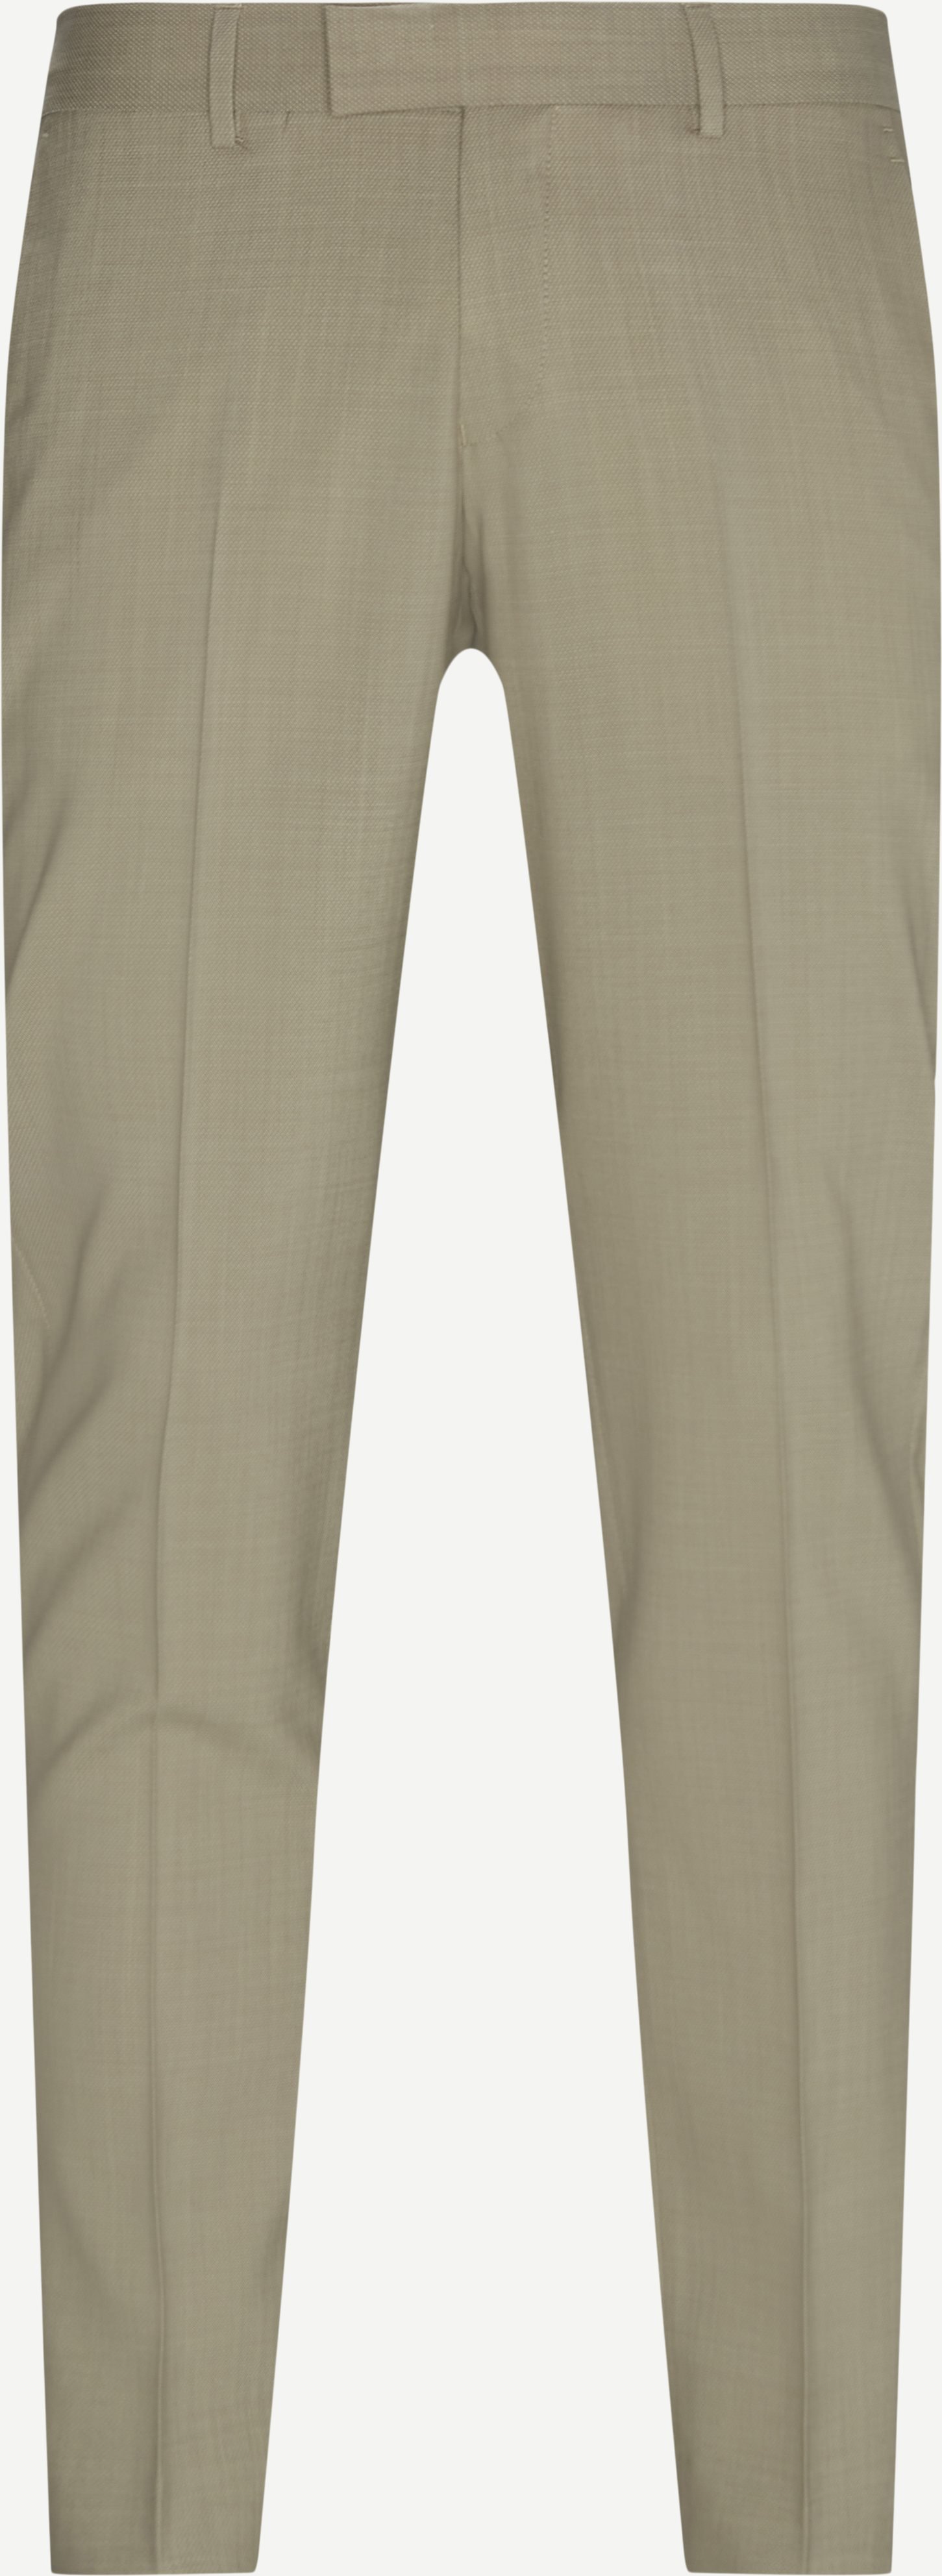 Tordon Trousers - Trousers - Slim fit - Sand